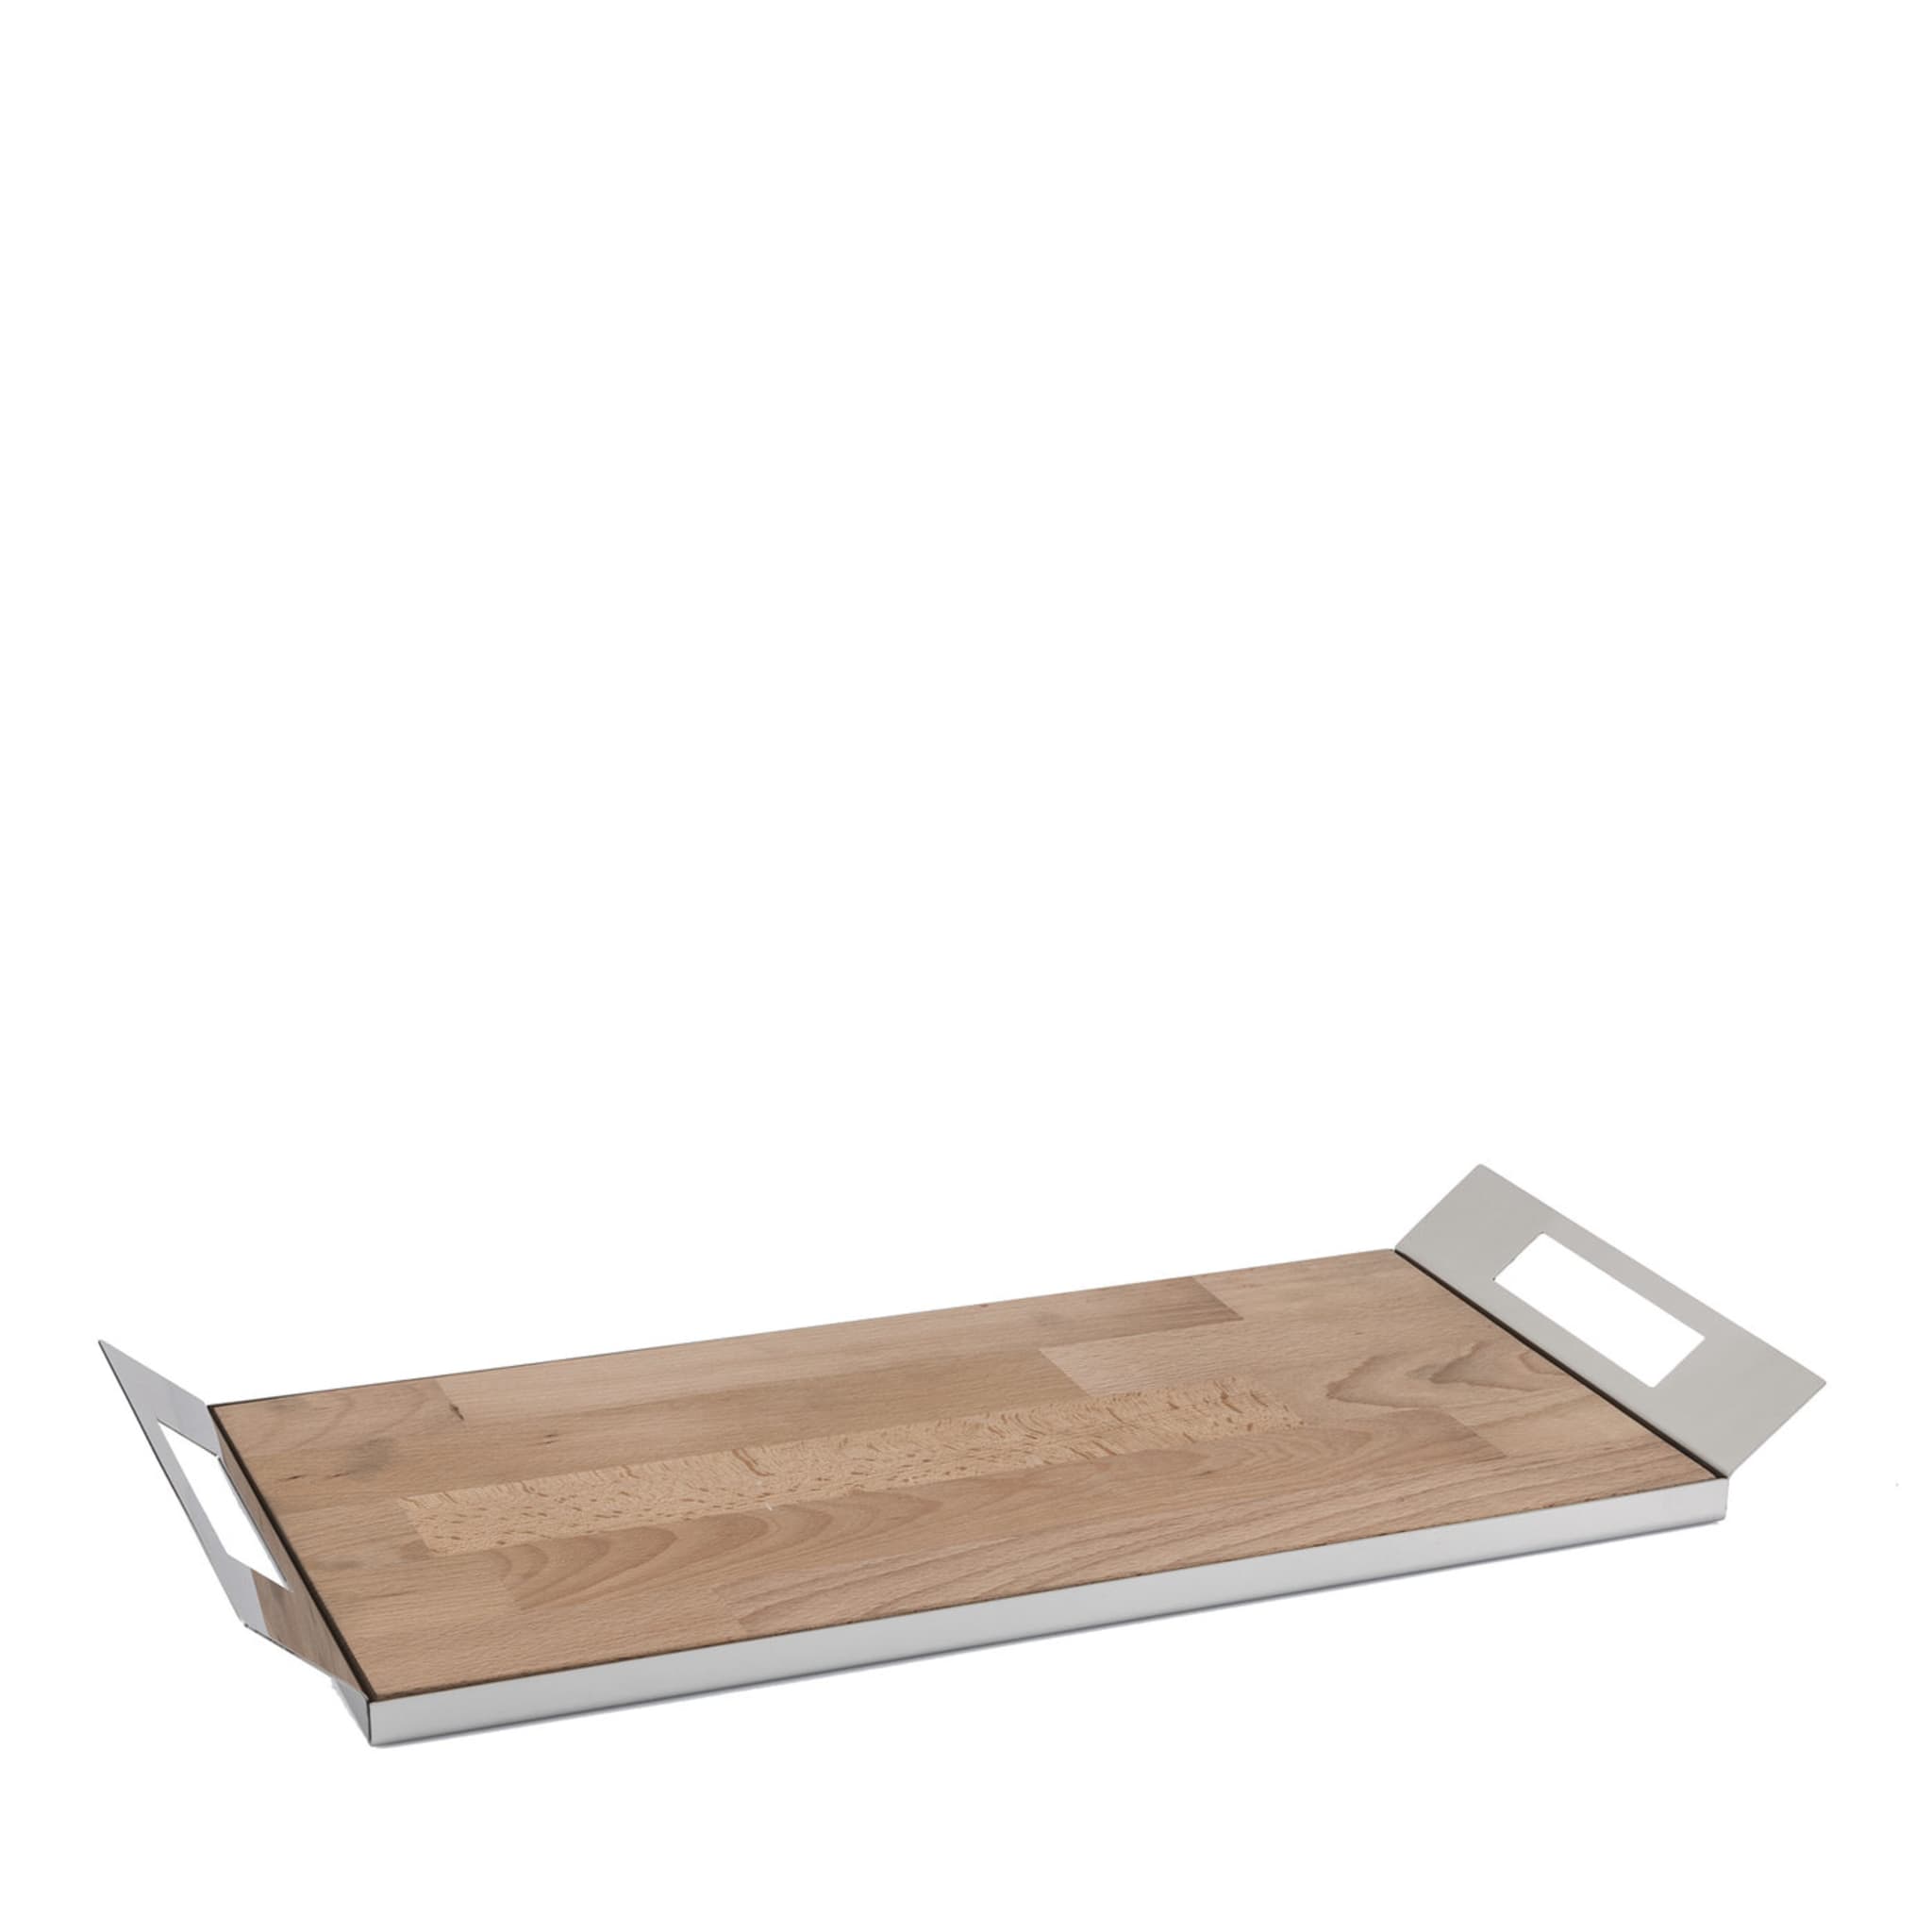 Serving Tray in Stainless Steel and Wood - Main view